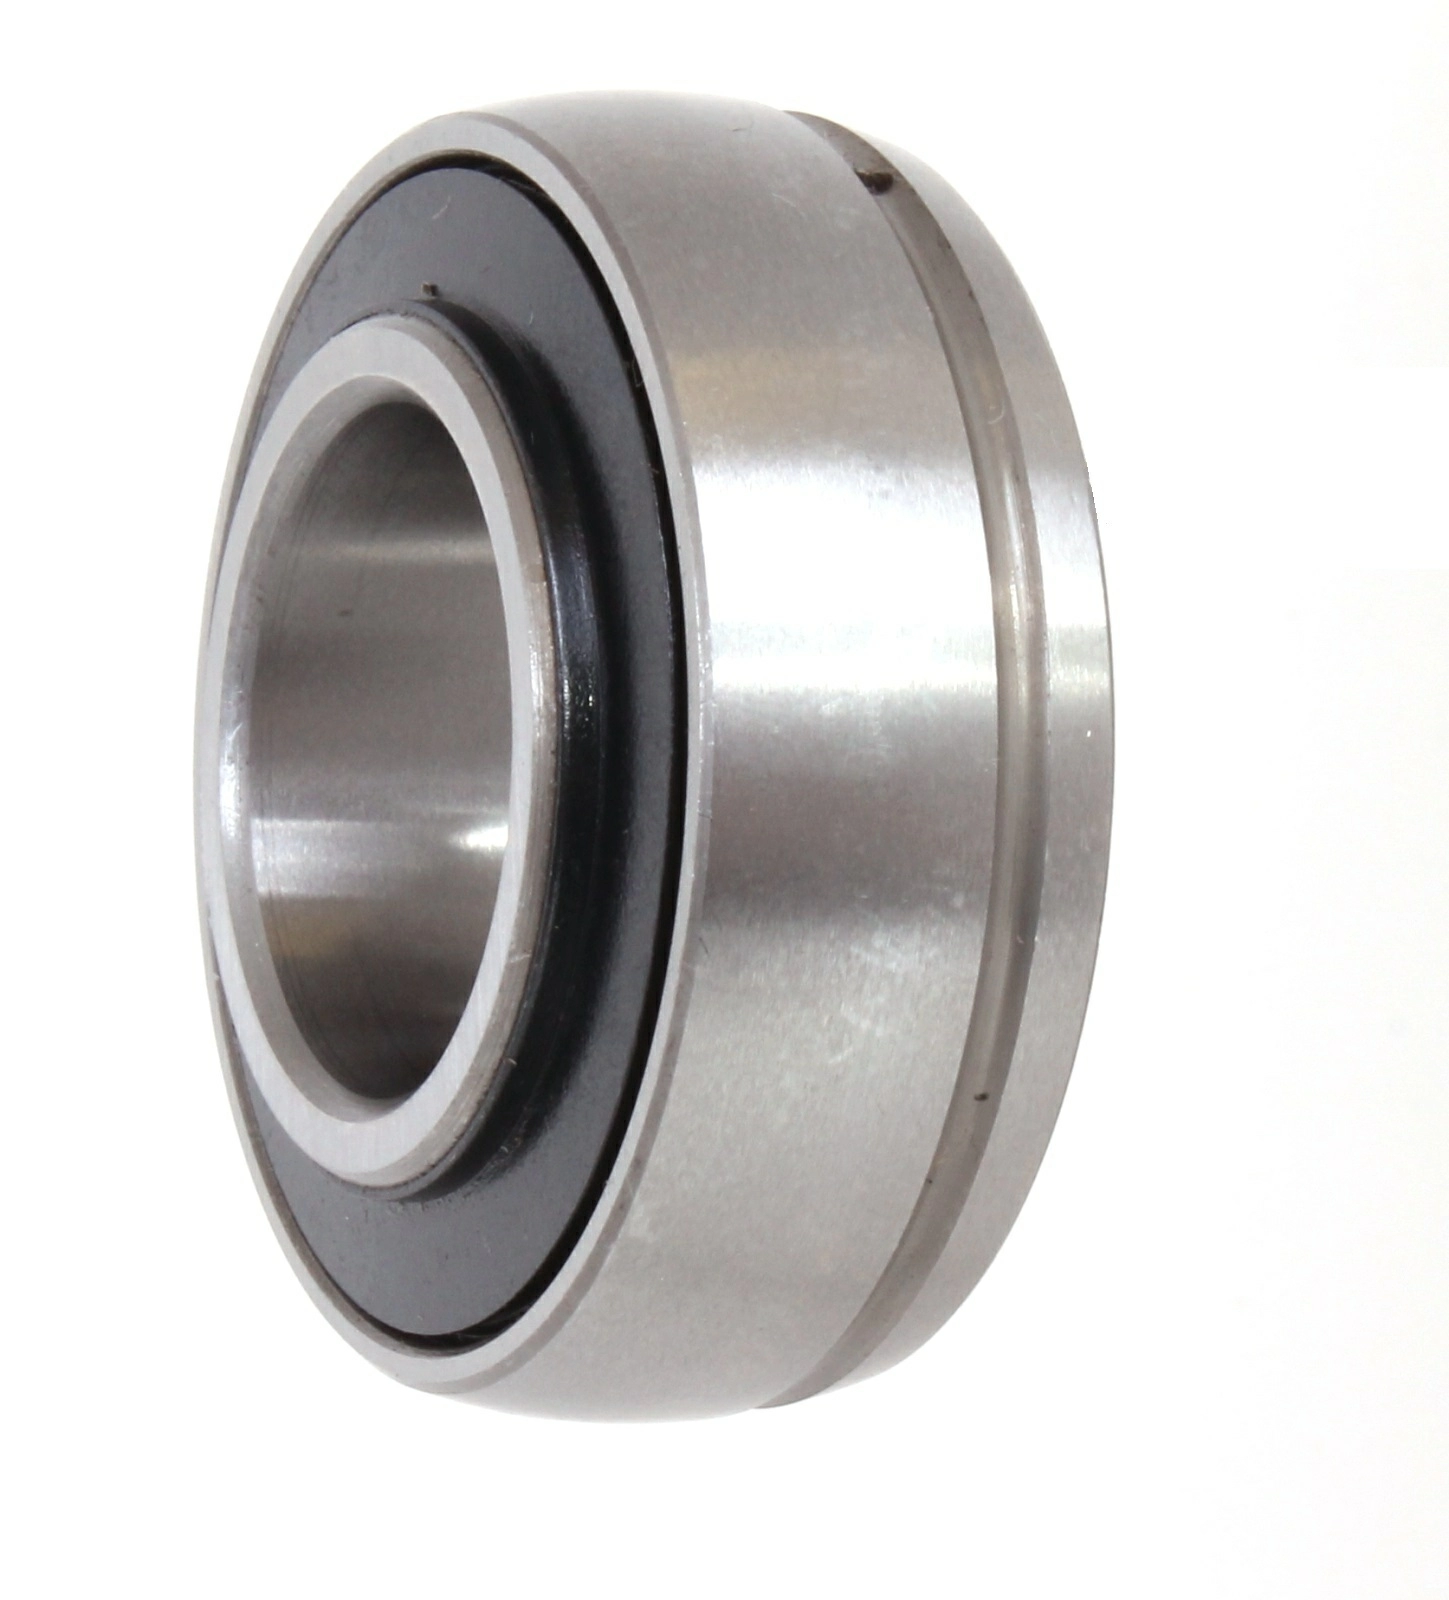 Bearing Inserts Spherical Outer 1000KG, UC, UCX, T1000, Extended Inner both sides, Tapered Bore